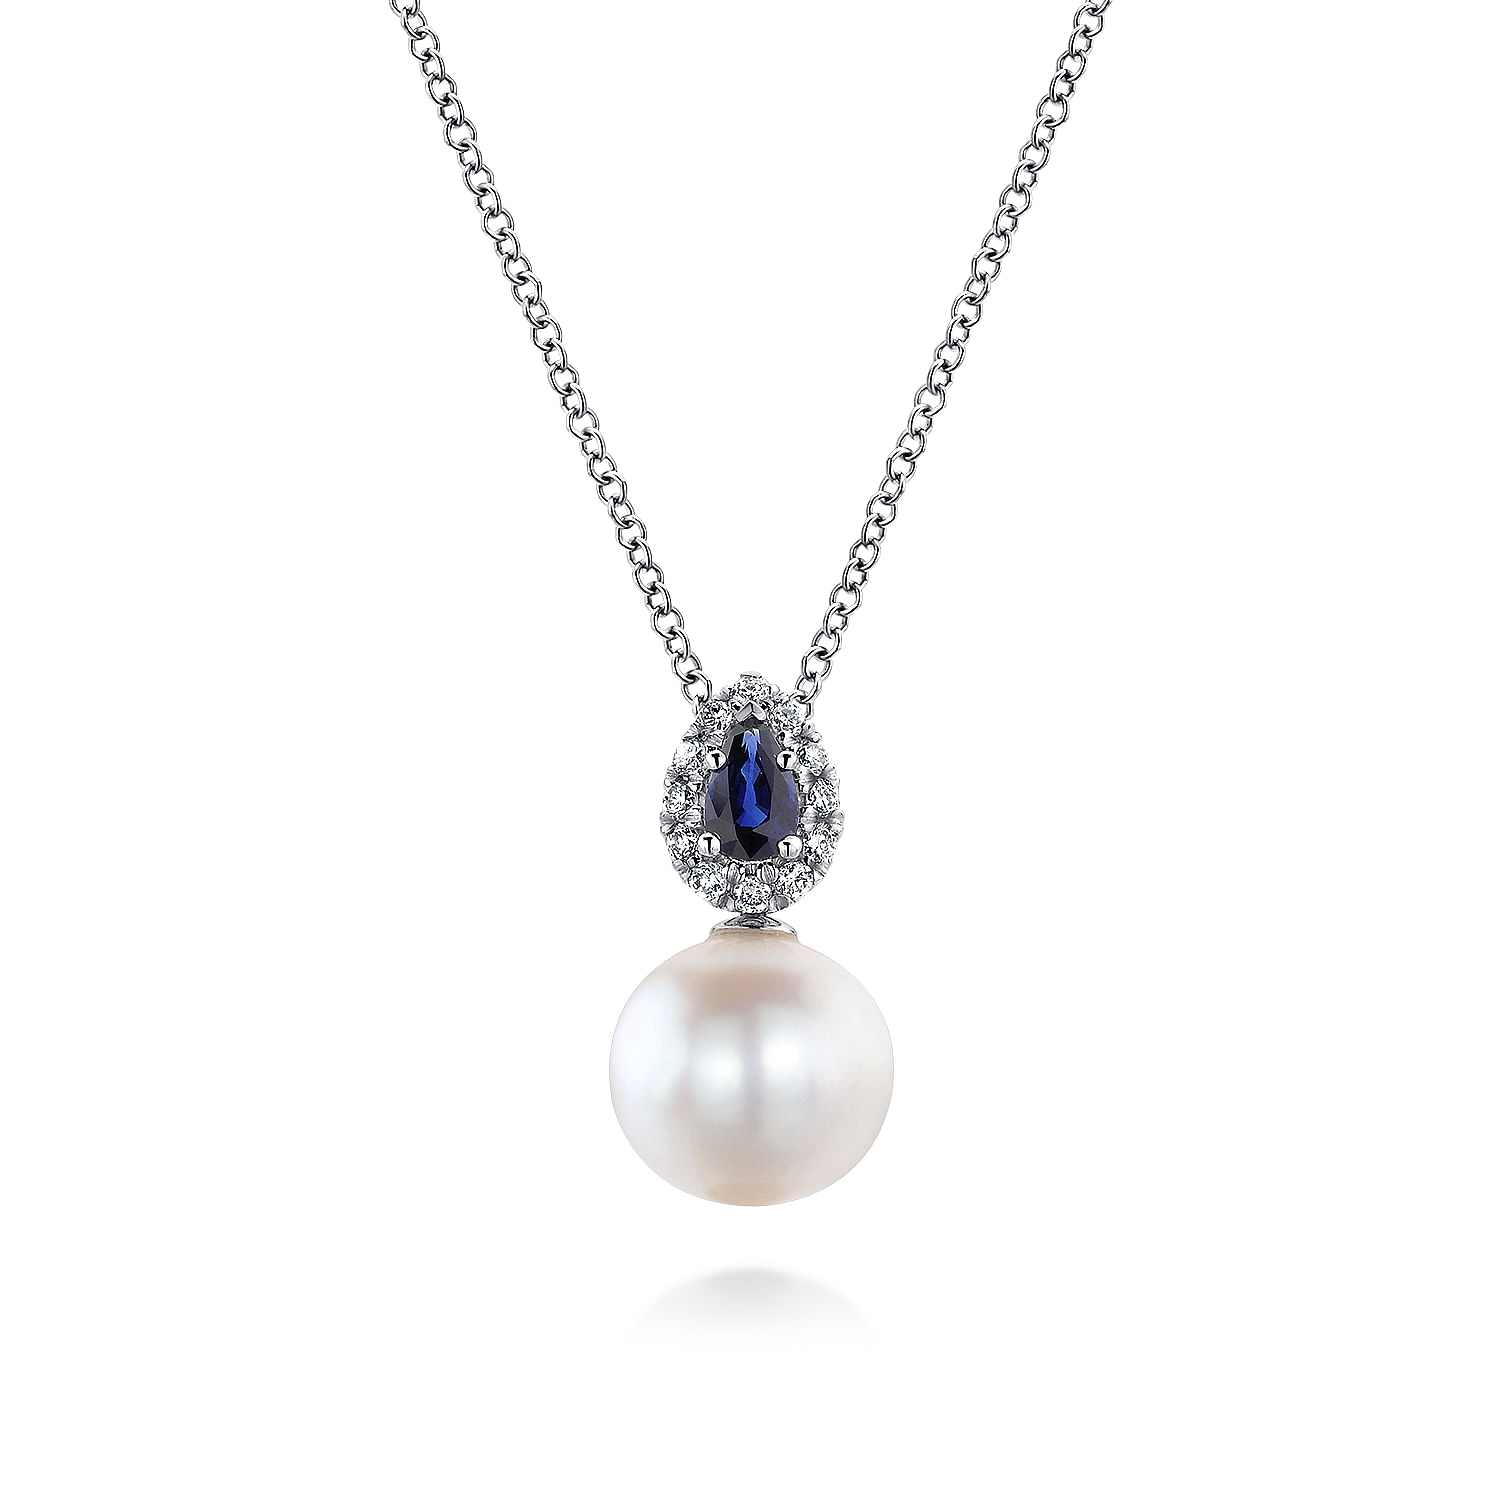 14K White Gold Pear Shaped Sapphire and Diamond Halo Pendant Necklace with Pearl